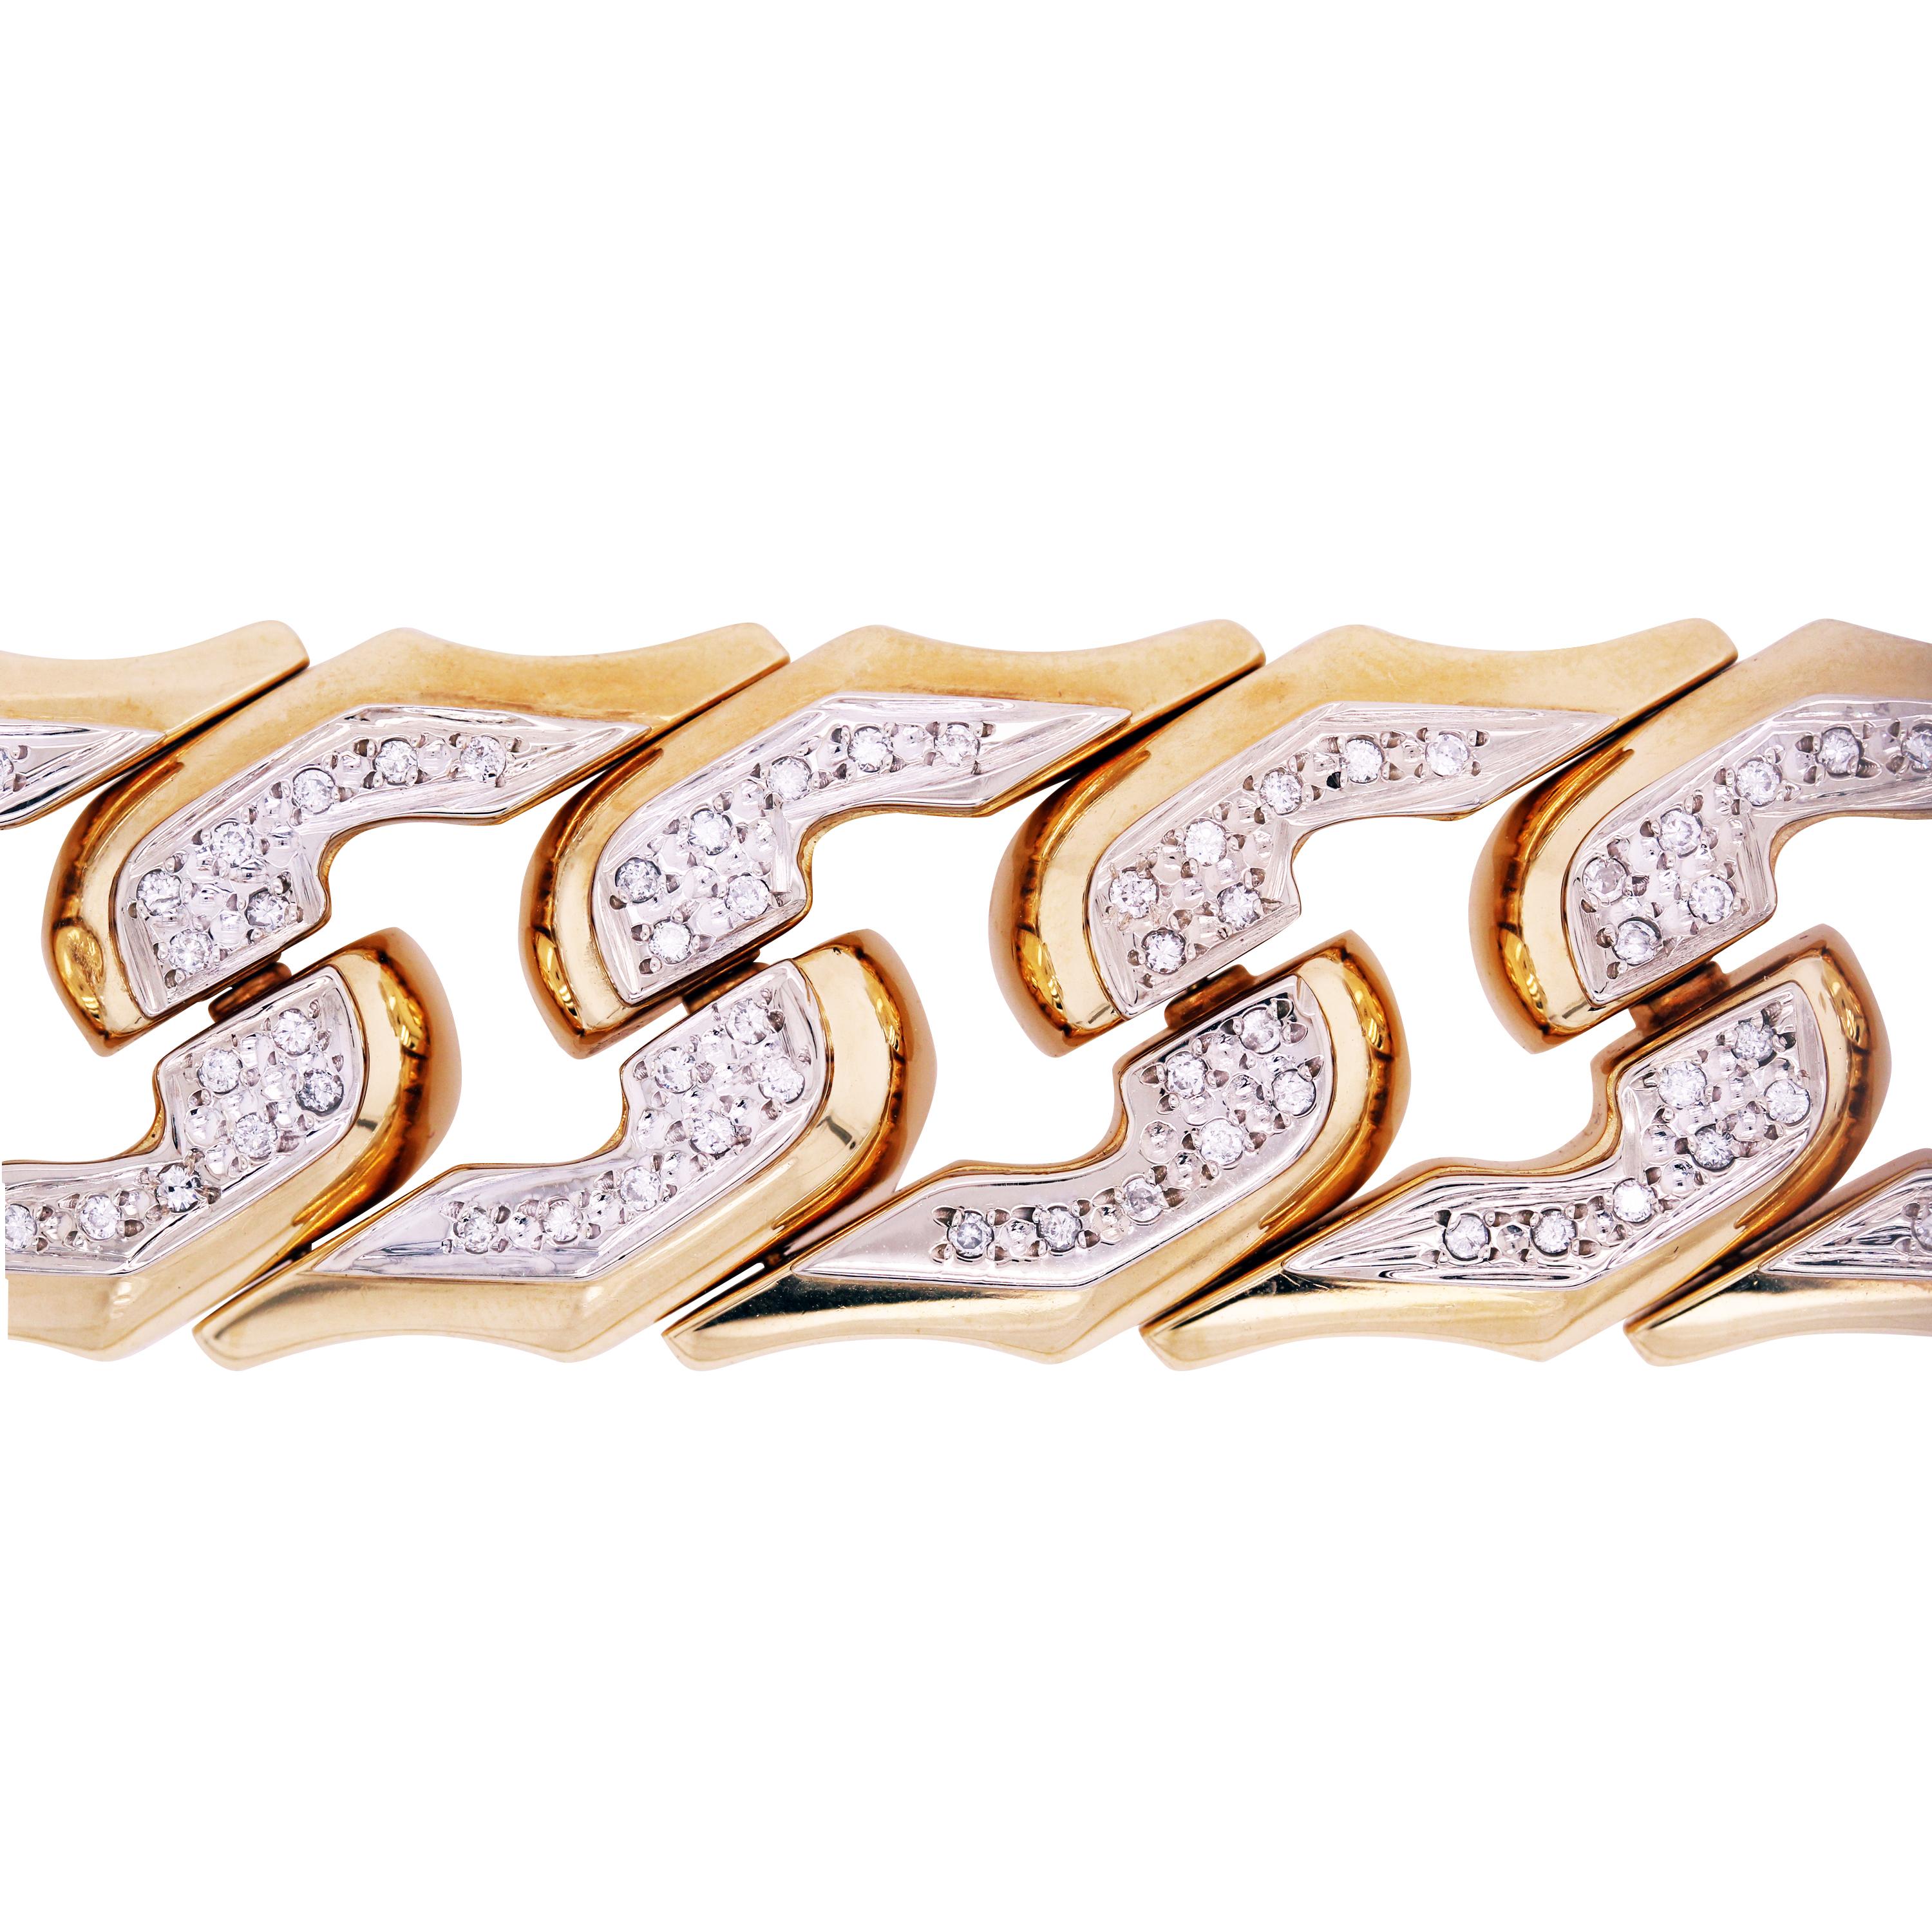 18K Yellow and White Gold Cuban Link Bracelet with Diamonds

This bracelet features 1.80 carat apprx. G color, VS clarity diamonds total weight

Bracelet weighs 83.60 grams

7.5 inches in length and 0.95 inches in width